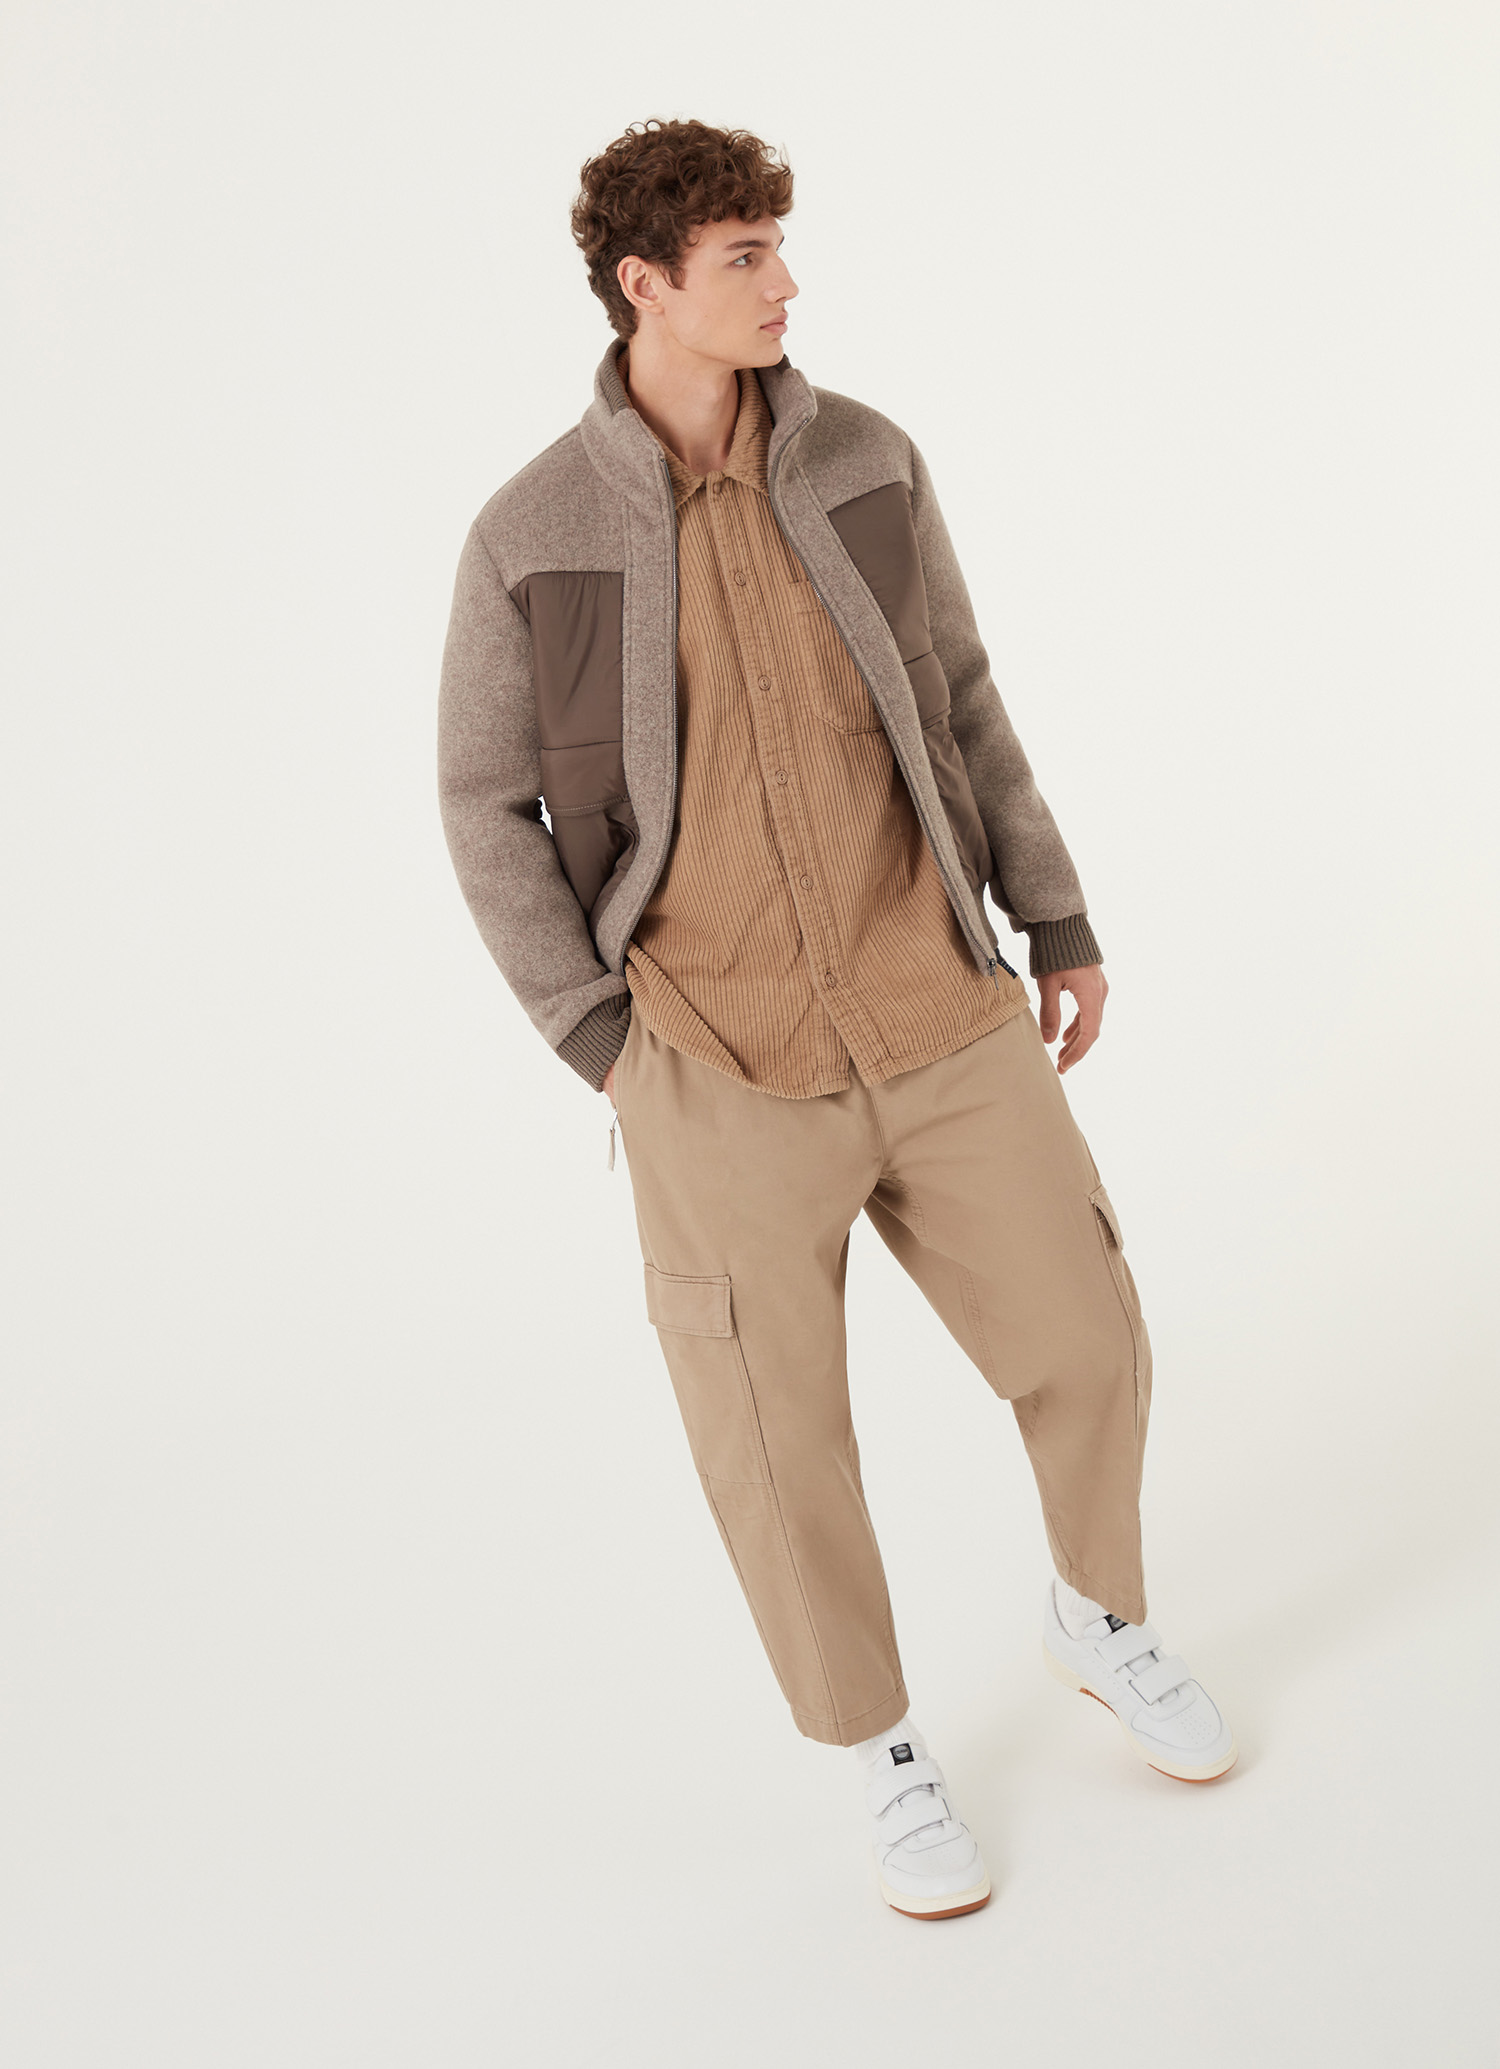 Classic Bomber Jacket in Cotton Twill Chino and Weatherproof Nylon